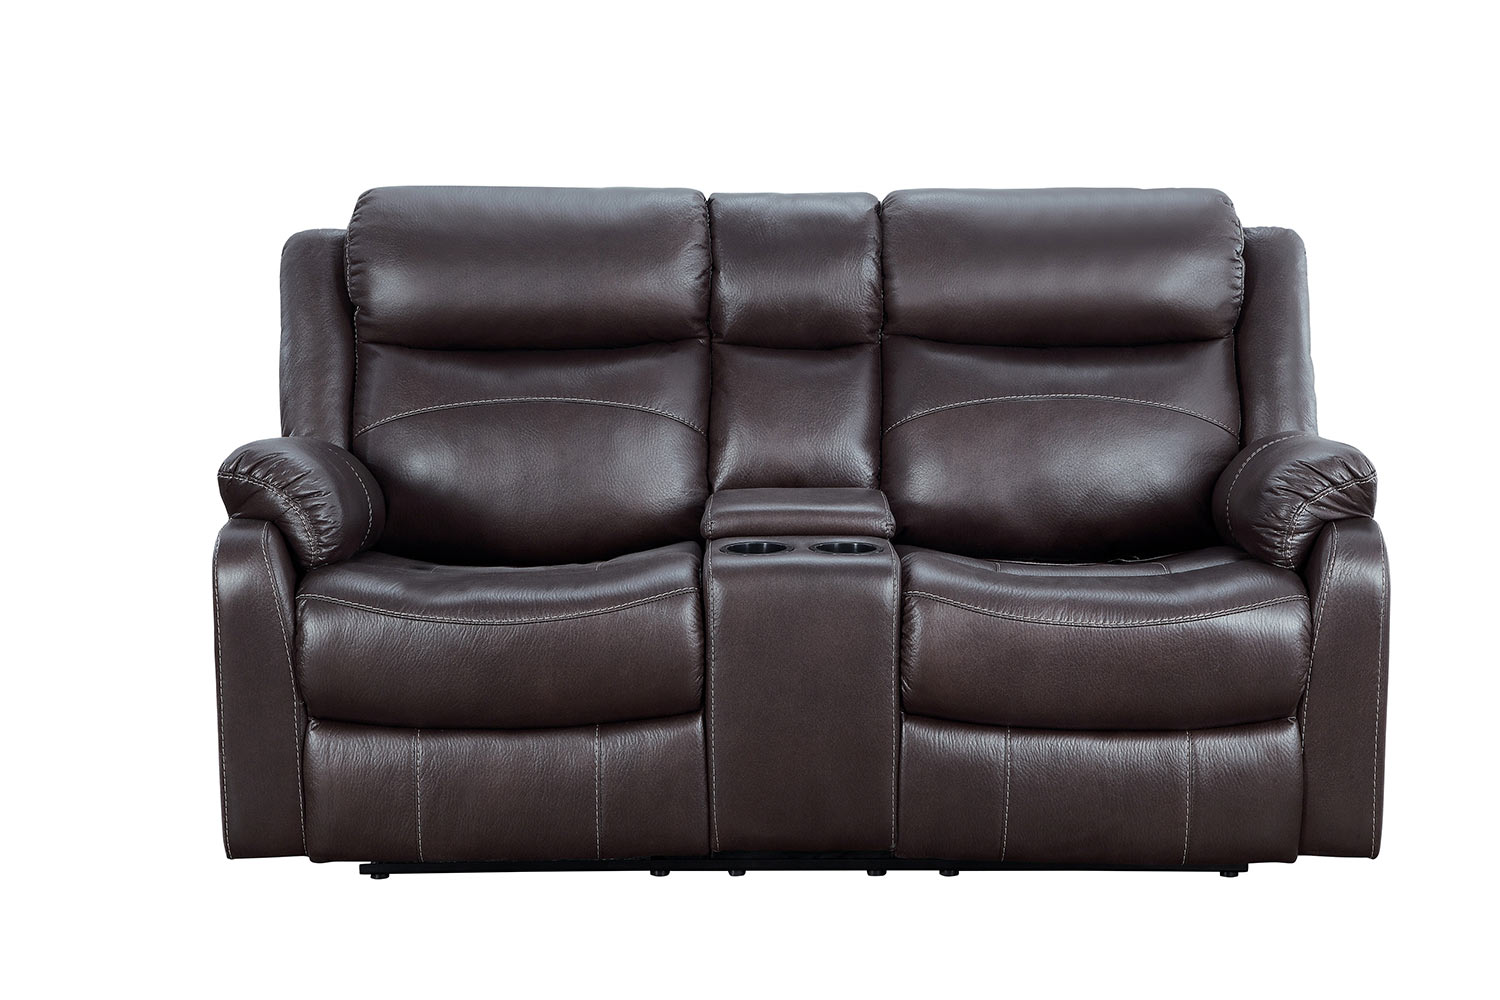 Homelegance Yerba Double Lay Flat Reclining Love Seat With Center Console - Dark Brown